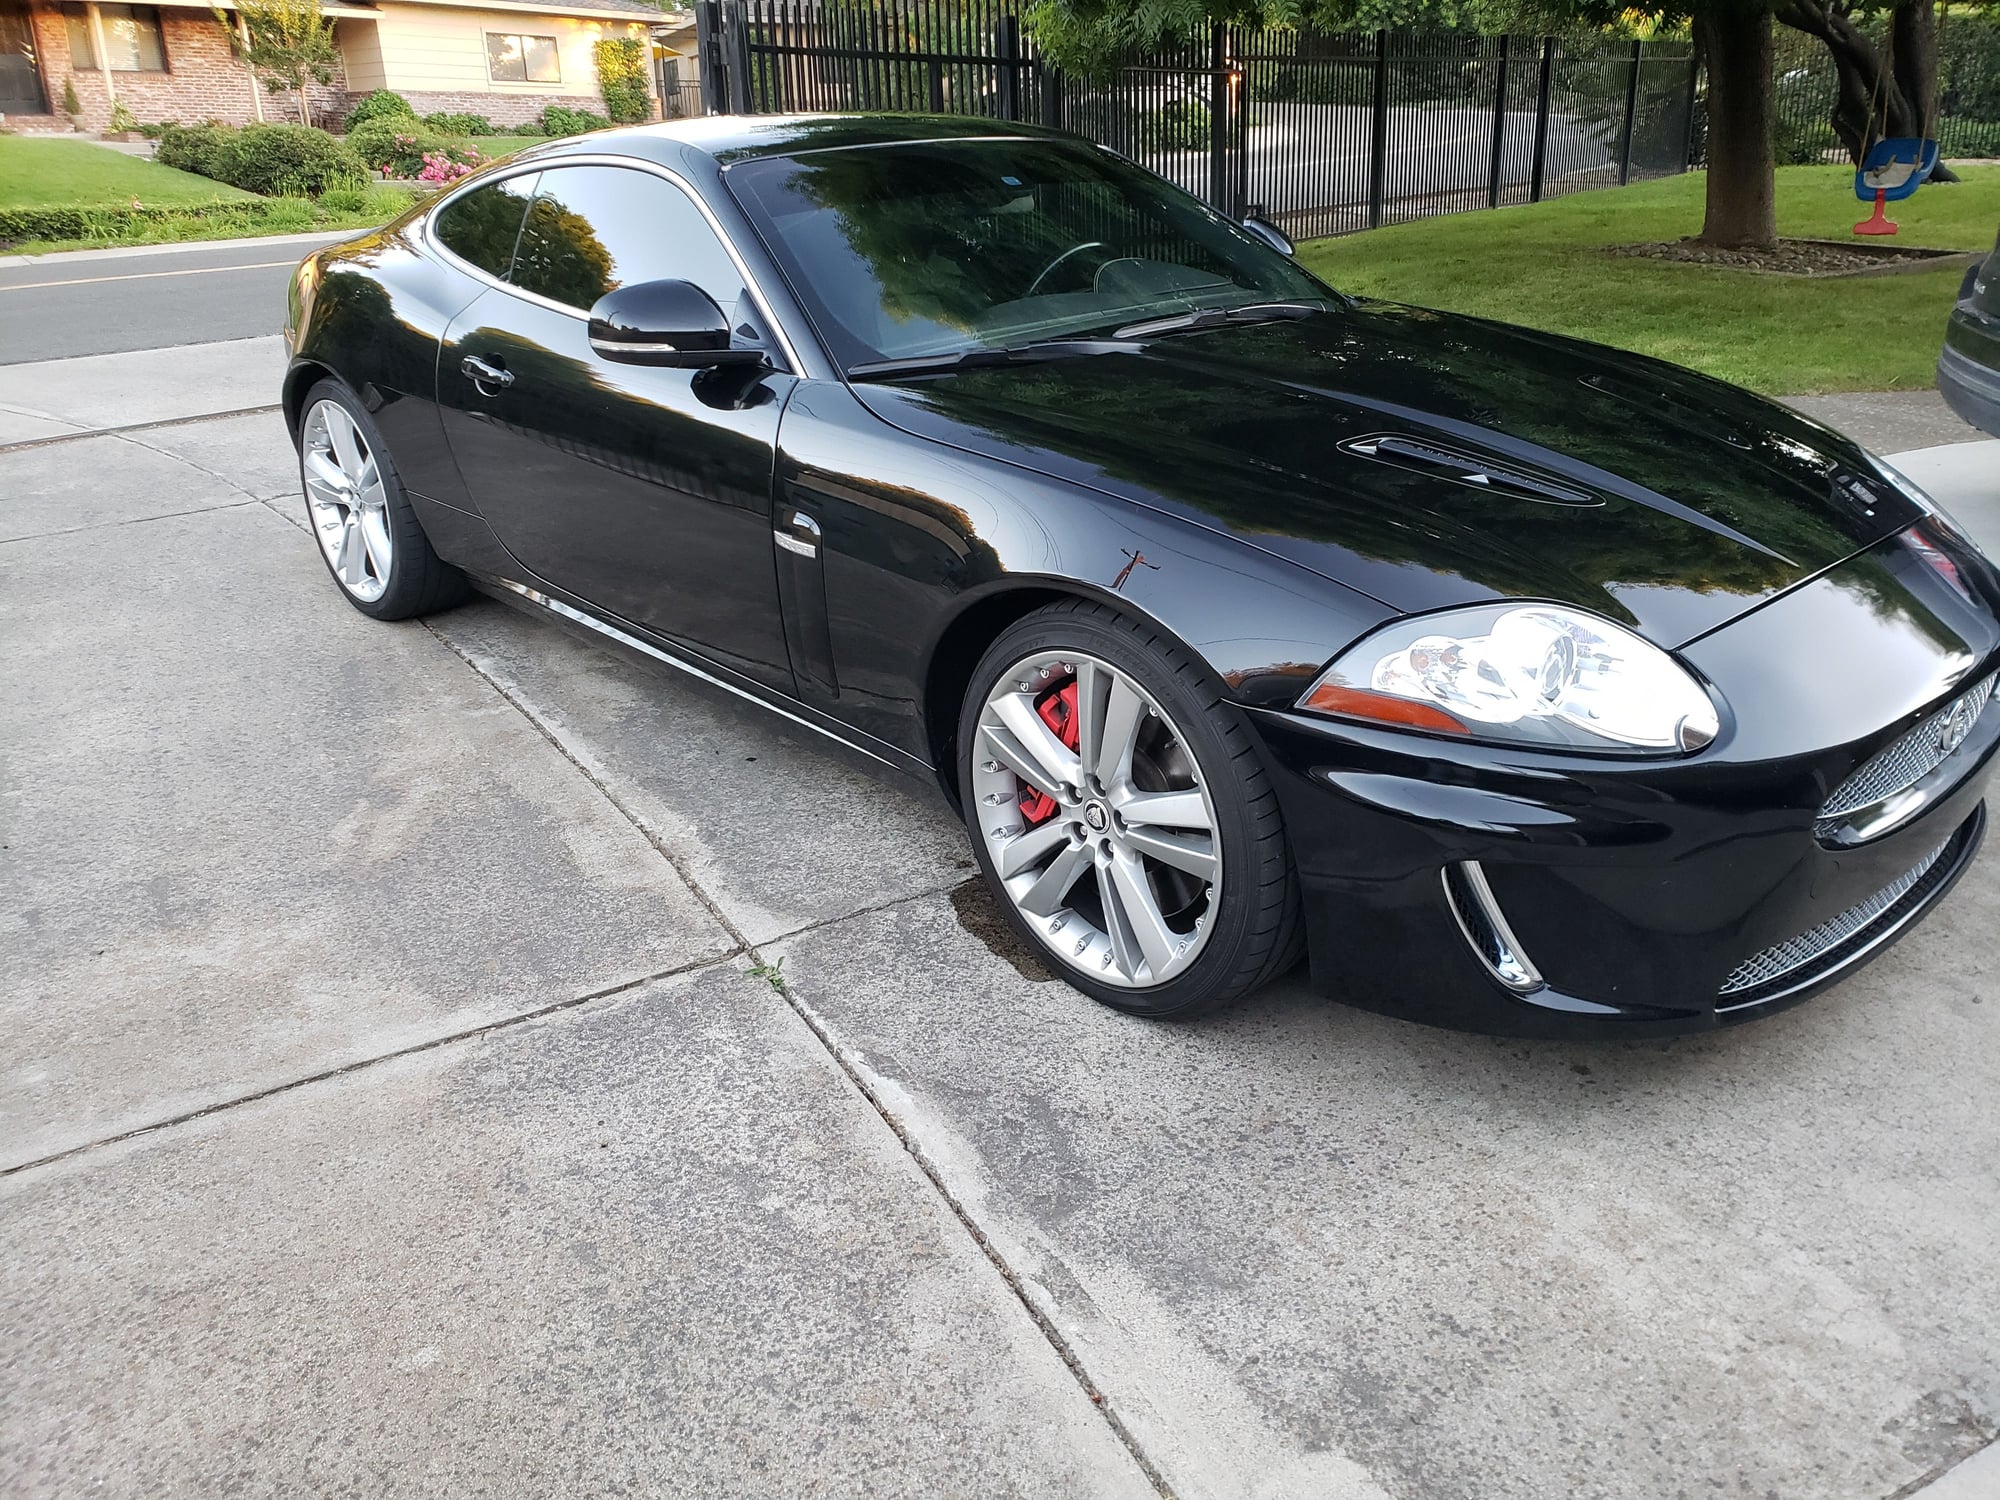 2011 Jaguar XKR - 2011 xkr - Used - VIN Sajwa4dc9bmb42141 - 72,000 Miles - 8 cyl - 2WD - Automatic - Coupe - Black - Riverbank, CA 95367, United States